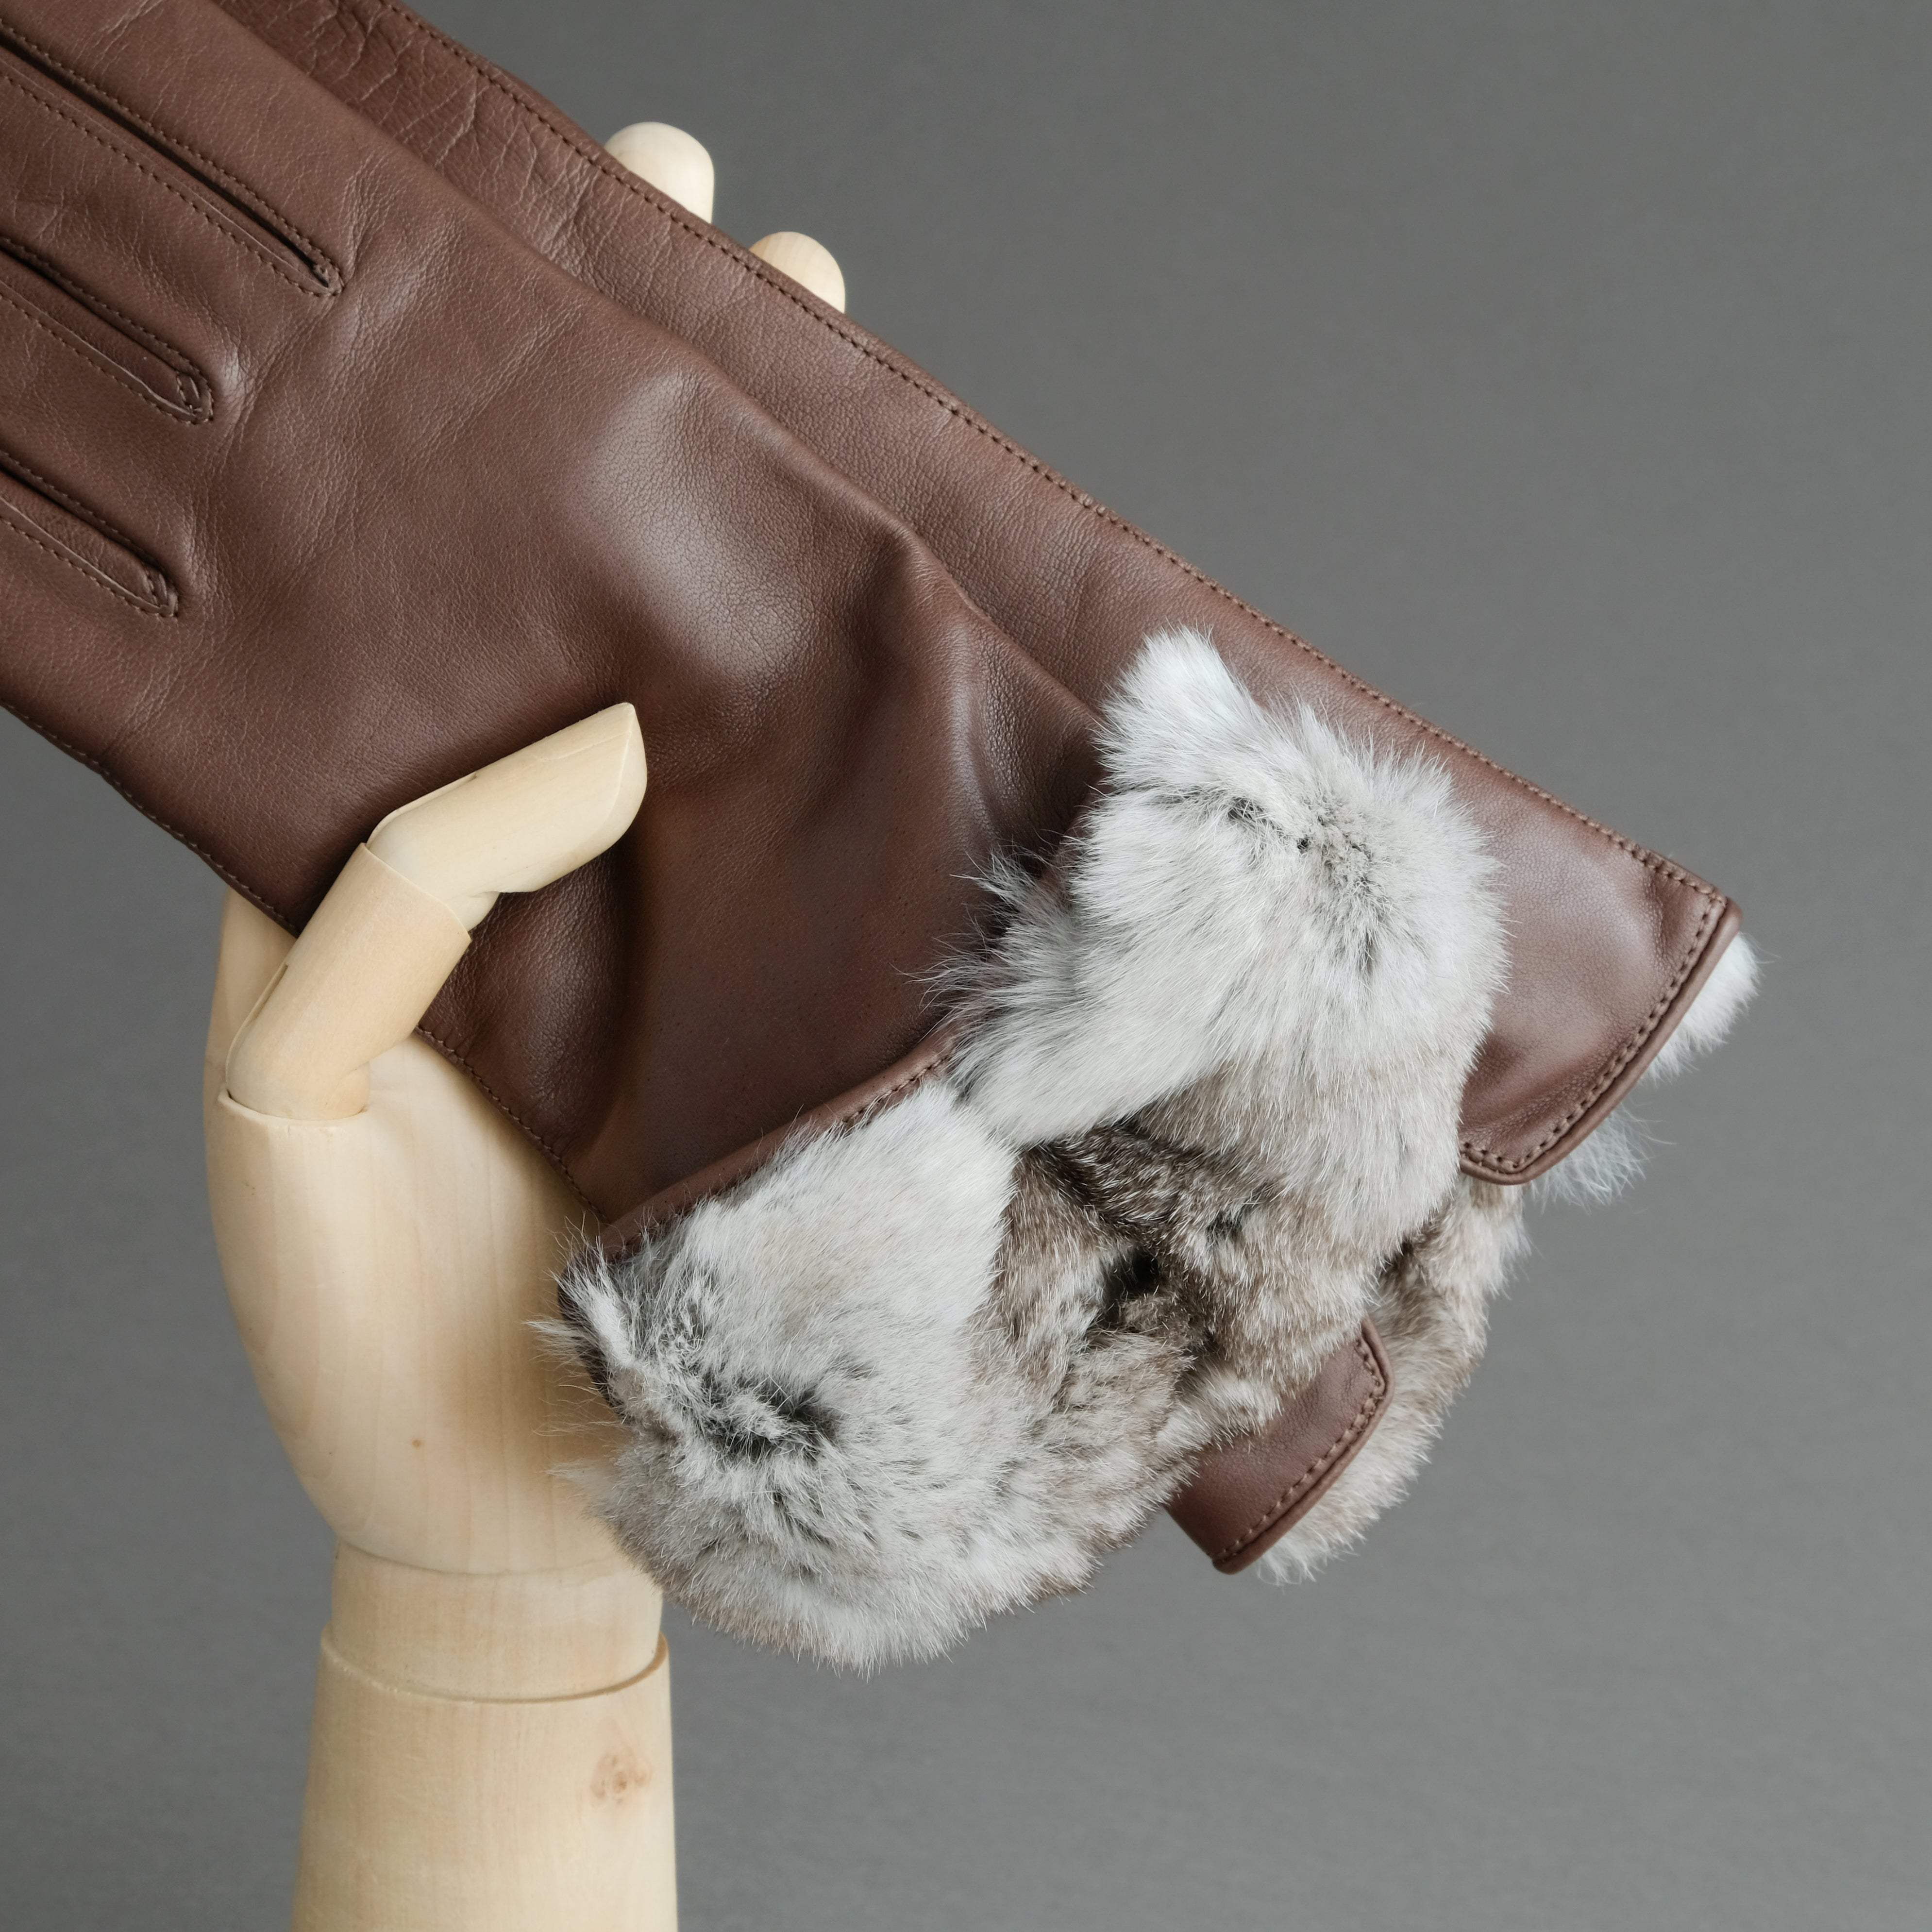 Ladies Gloves from Hair Sheep Nappa lined with Cashmere and Orylag - TR Handschuhe Wien - Thomas Riemer Handmade Gloves